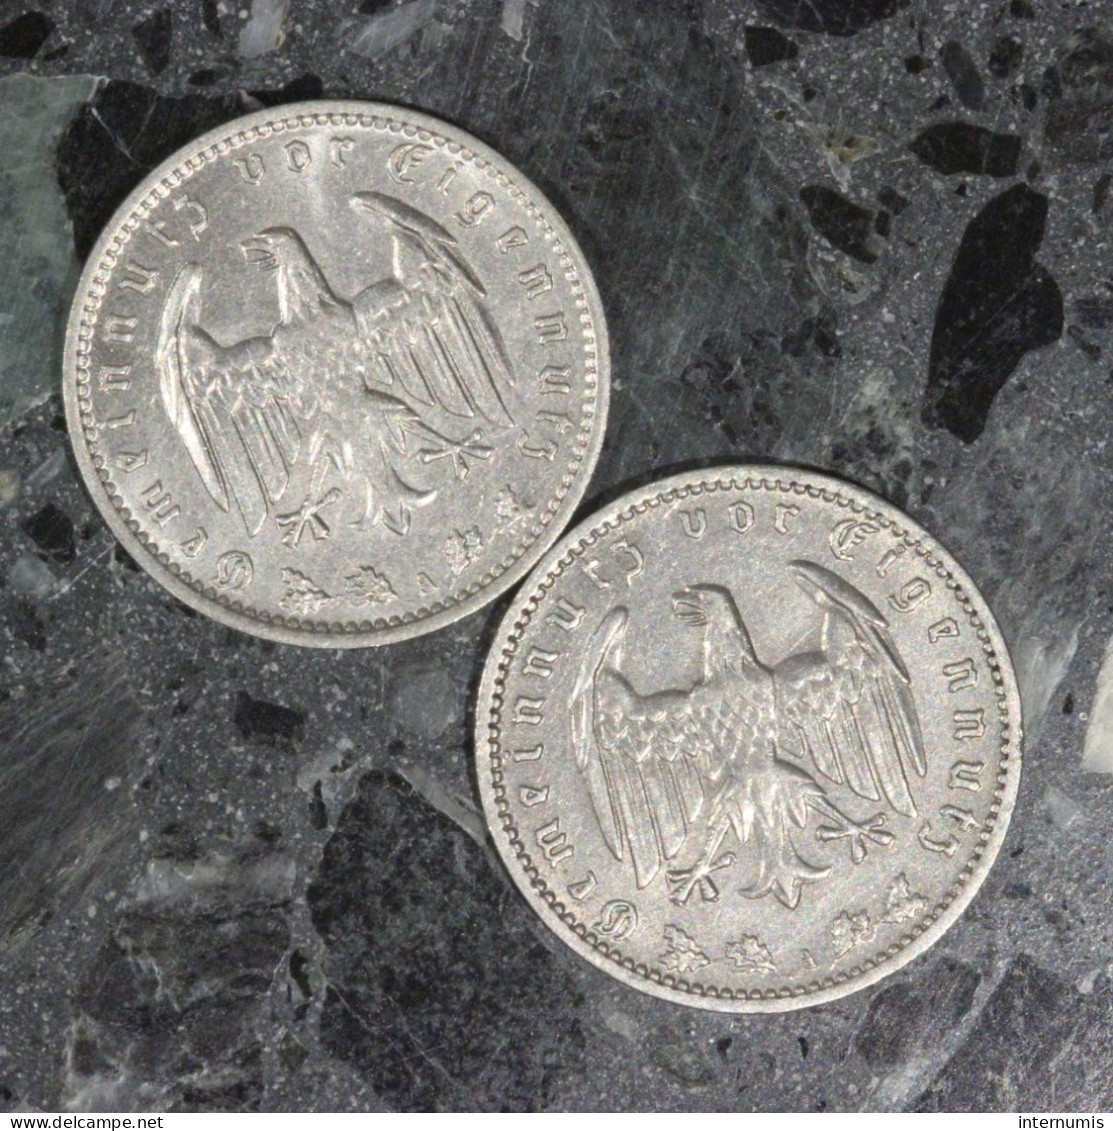 LOT (2) : 1 Mark 1935-A & 1937-A Allemagne / Germany, , 1 Reichsmark, 1935 & 1937, , Nickel, ,
KM# - Lots & Kiloware - Coins